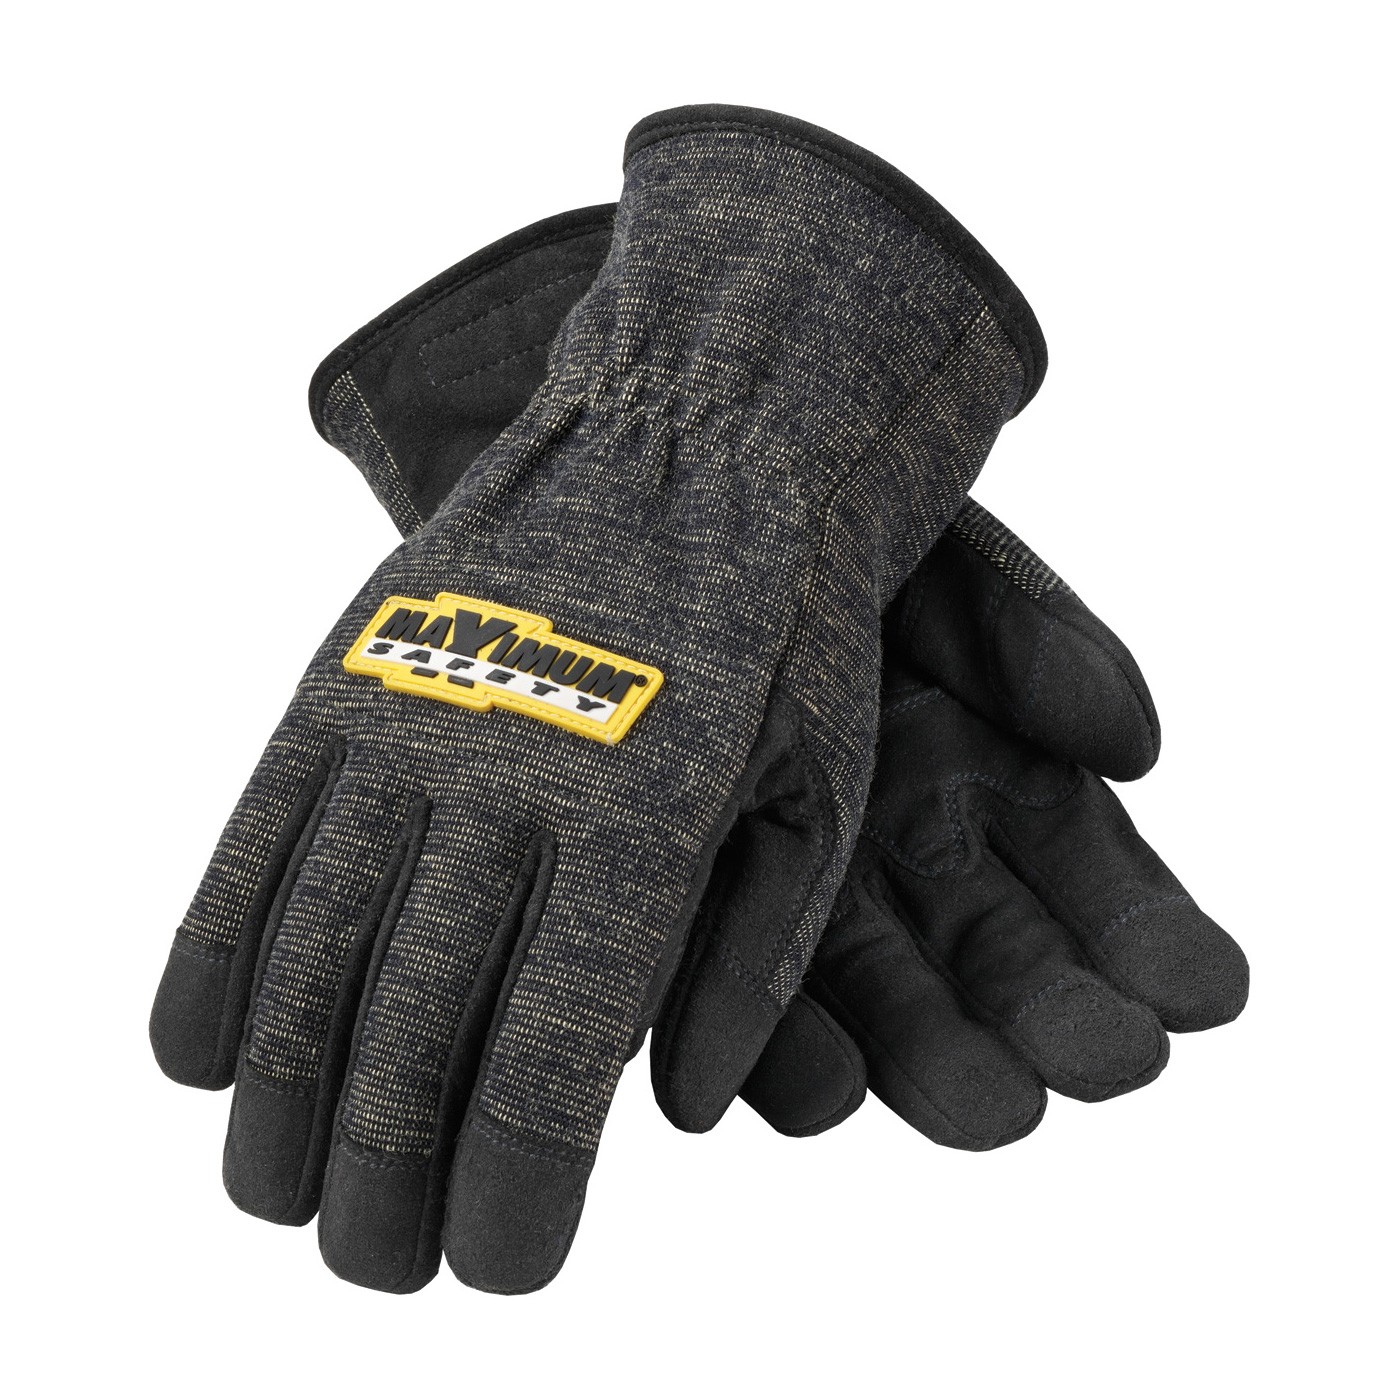 FR Treated Synthetic Leather Glove, Kevlar Lined, Reinforced Palm Size Medium